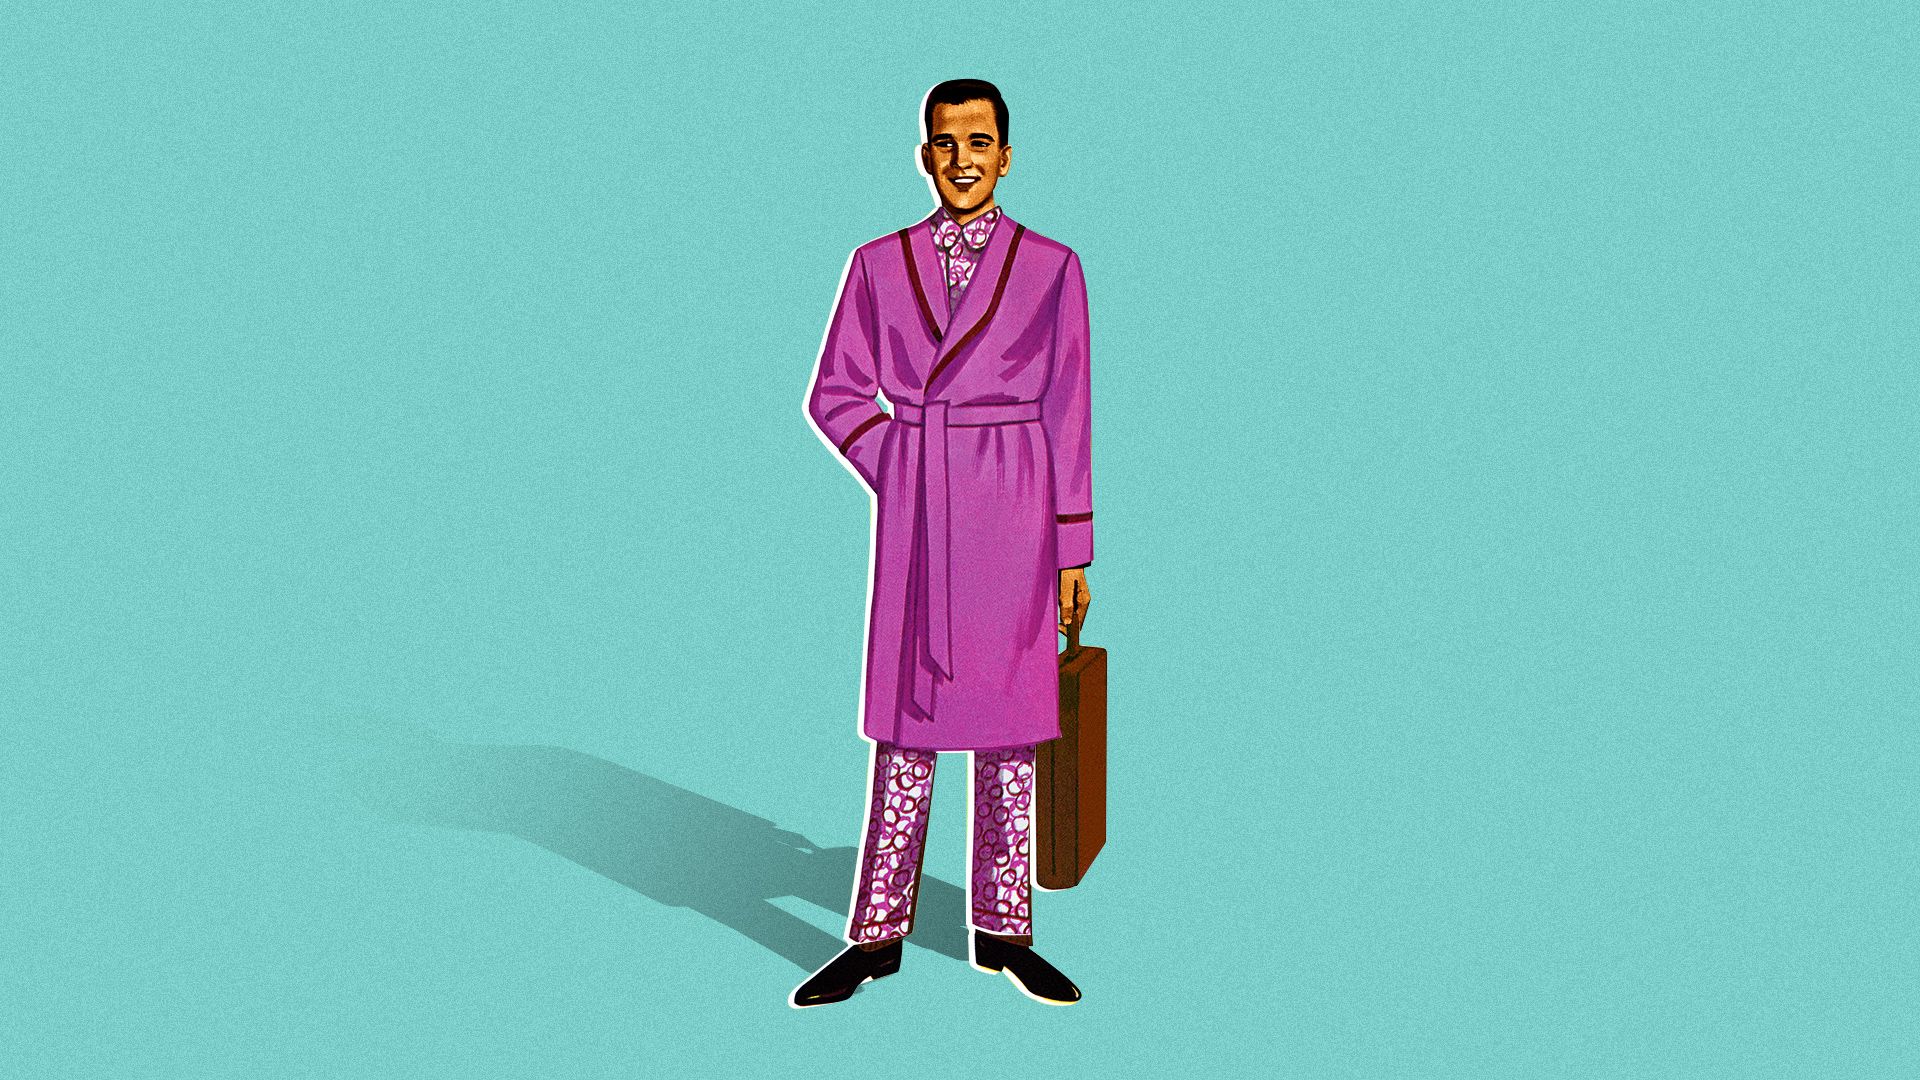 lustration of a man in a bathrobe with a briefcase done in 50s mid century modern illustration style.  